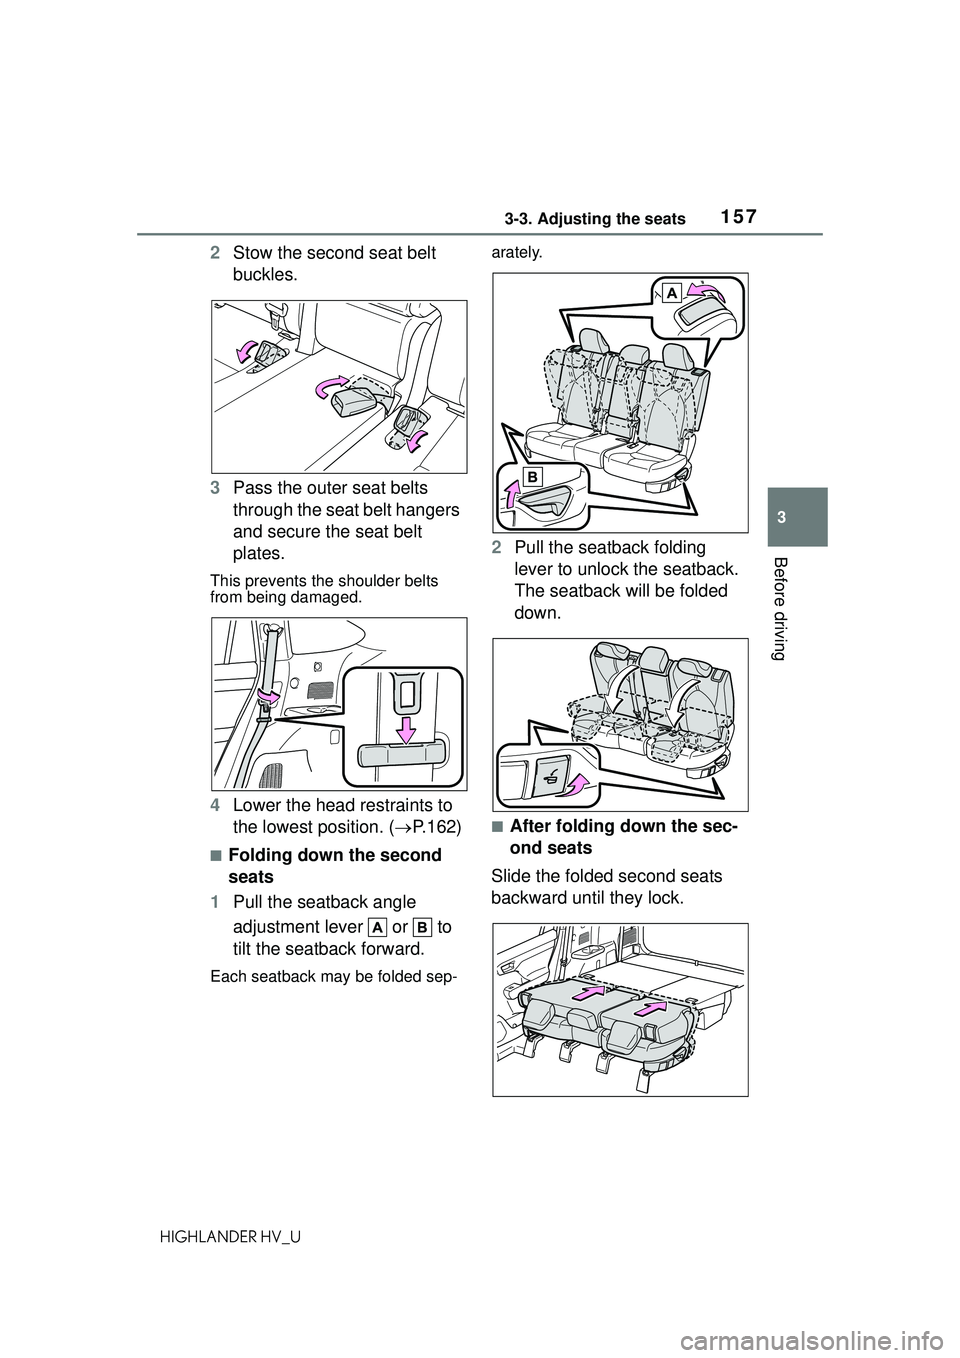 TOYOTA HIGHLANDER HYBRID 2021  Owners Manual (in English) 1573-3. Adjusting the seats
3
Before driving
HIGHLANDER HV_U
2Stow the second seat belt 
buckles.
3 Pass the outer seat belts 
through the seat belt hangers 
and secure the seat belt 
plates.
This pre